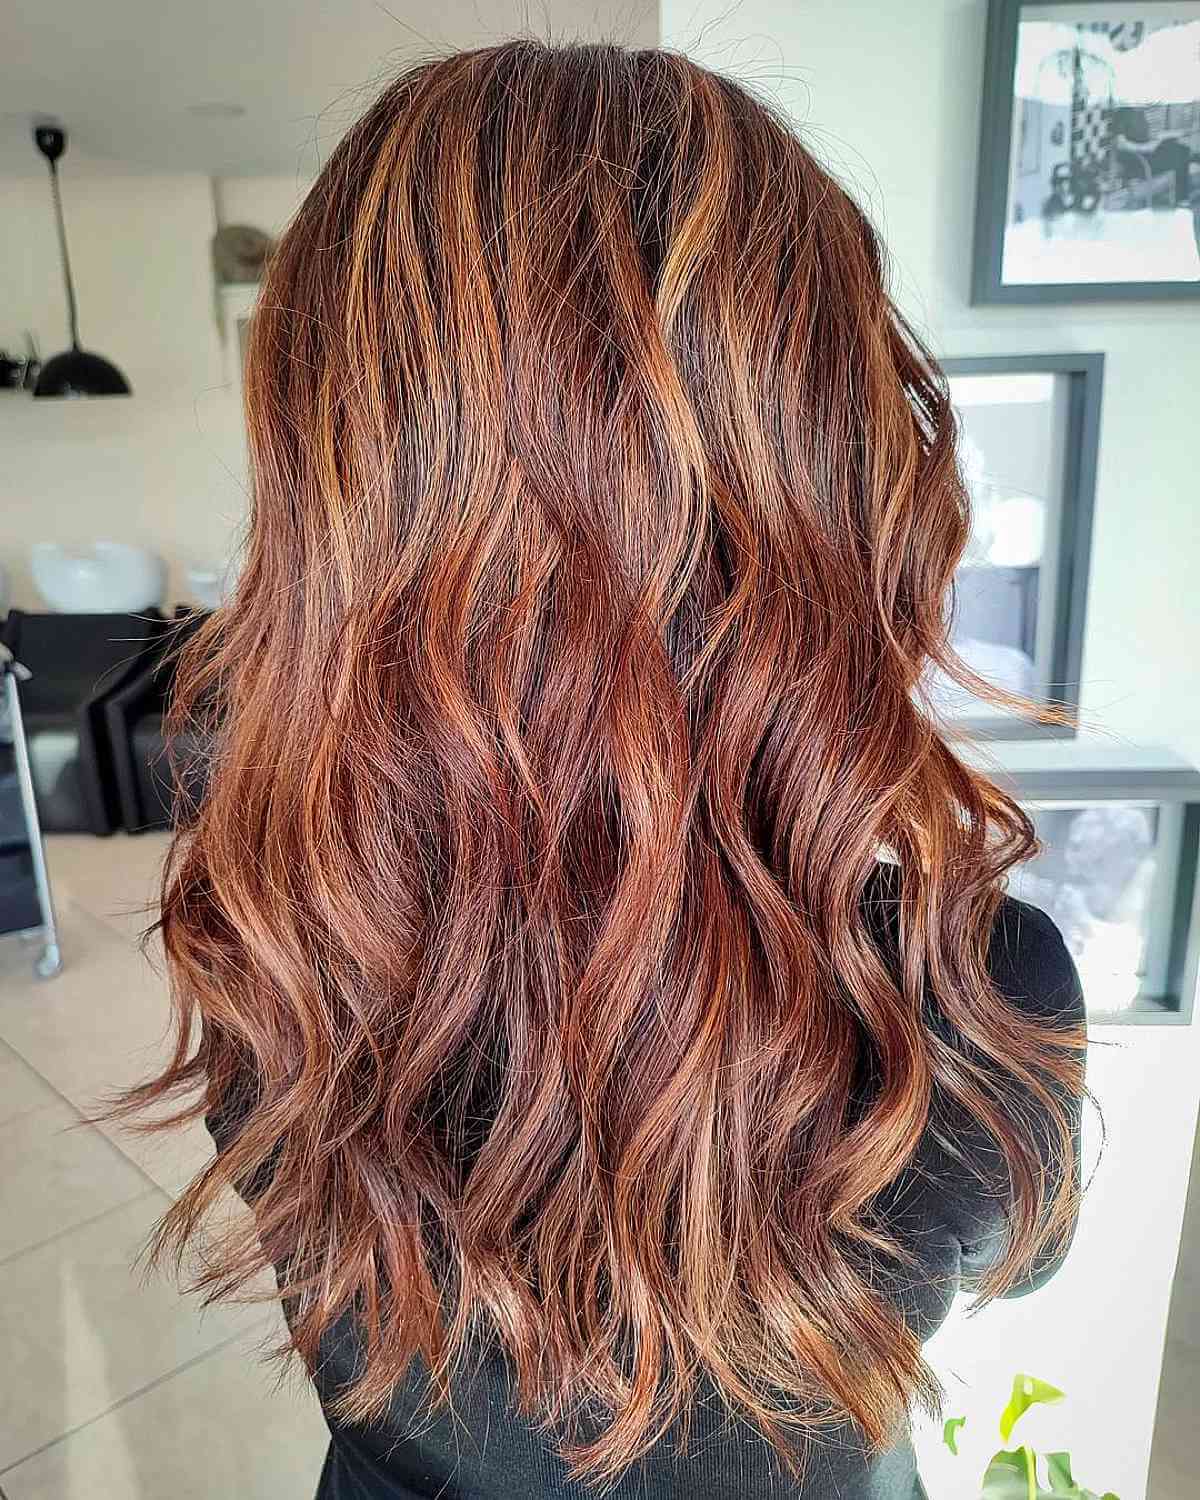 Its Easier Than You Think to Get Cinnamon and Chestnut Highlights